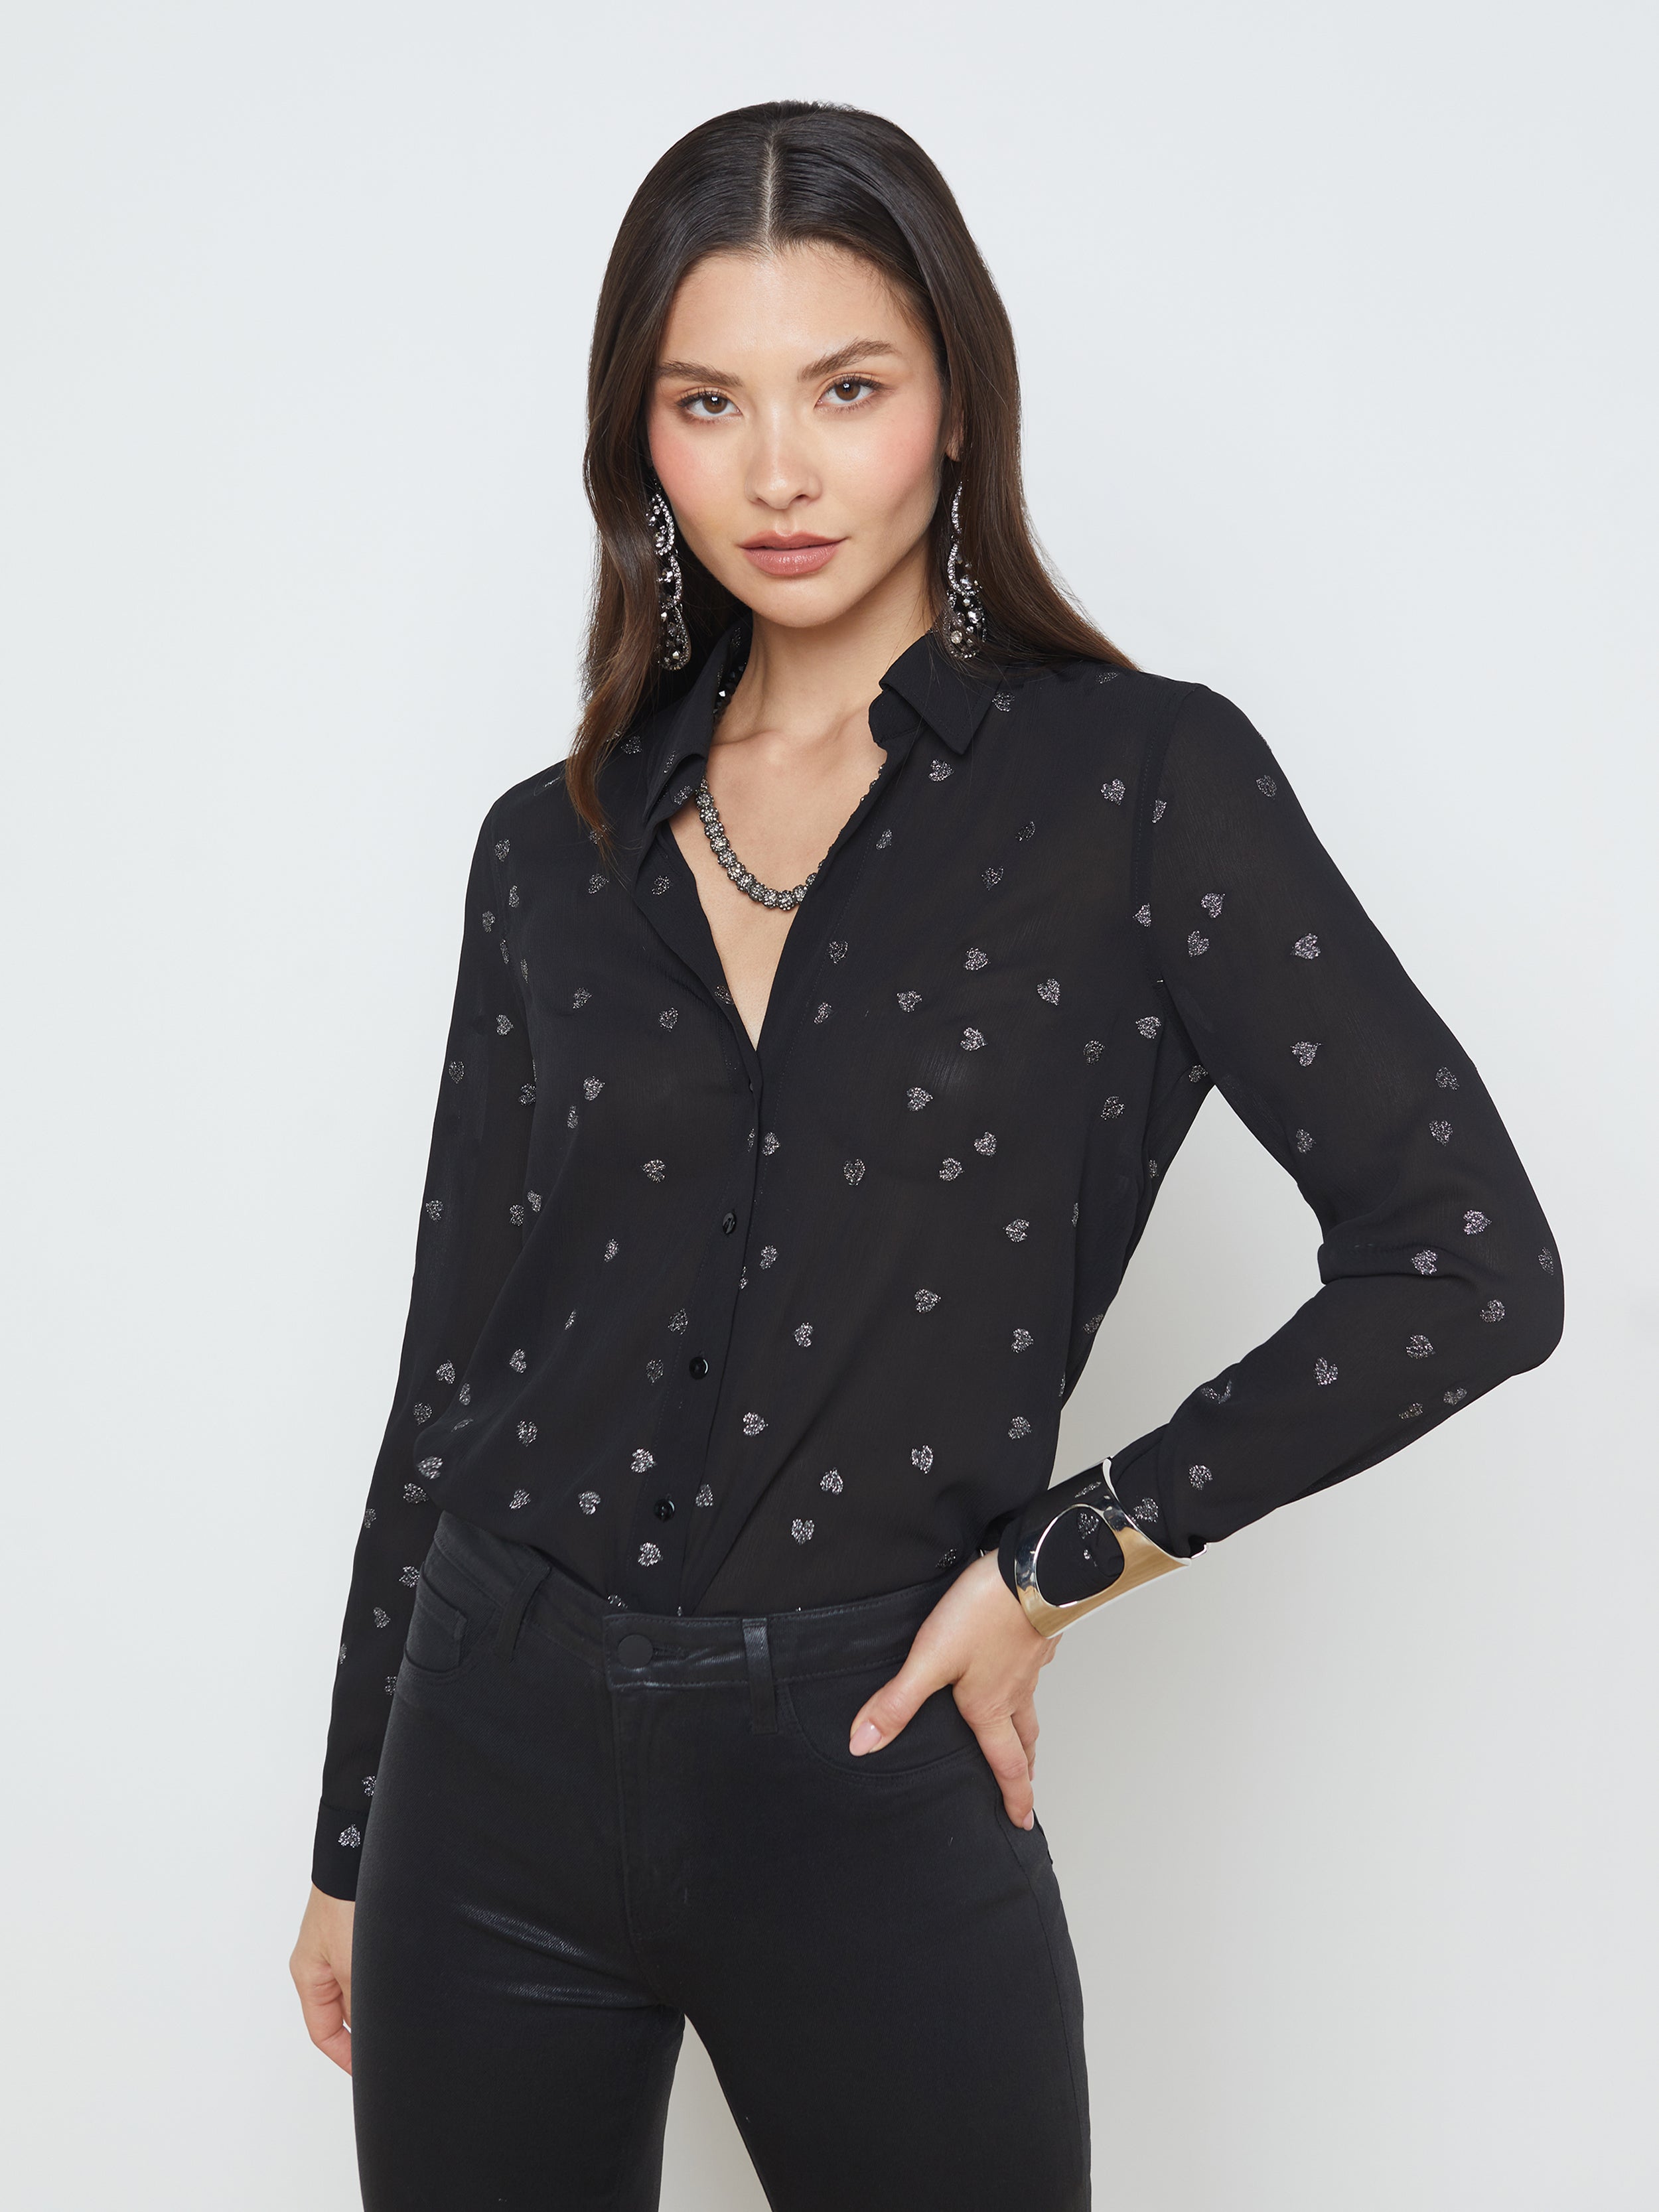 AMICA  COUTURE BLOUSE BLACK 新品未使用drawer